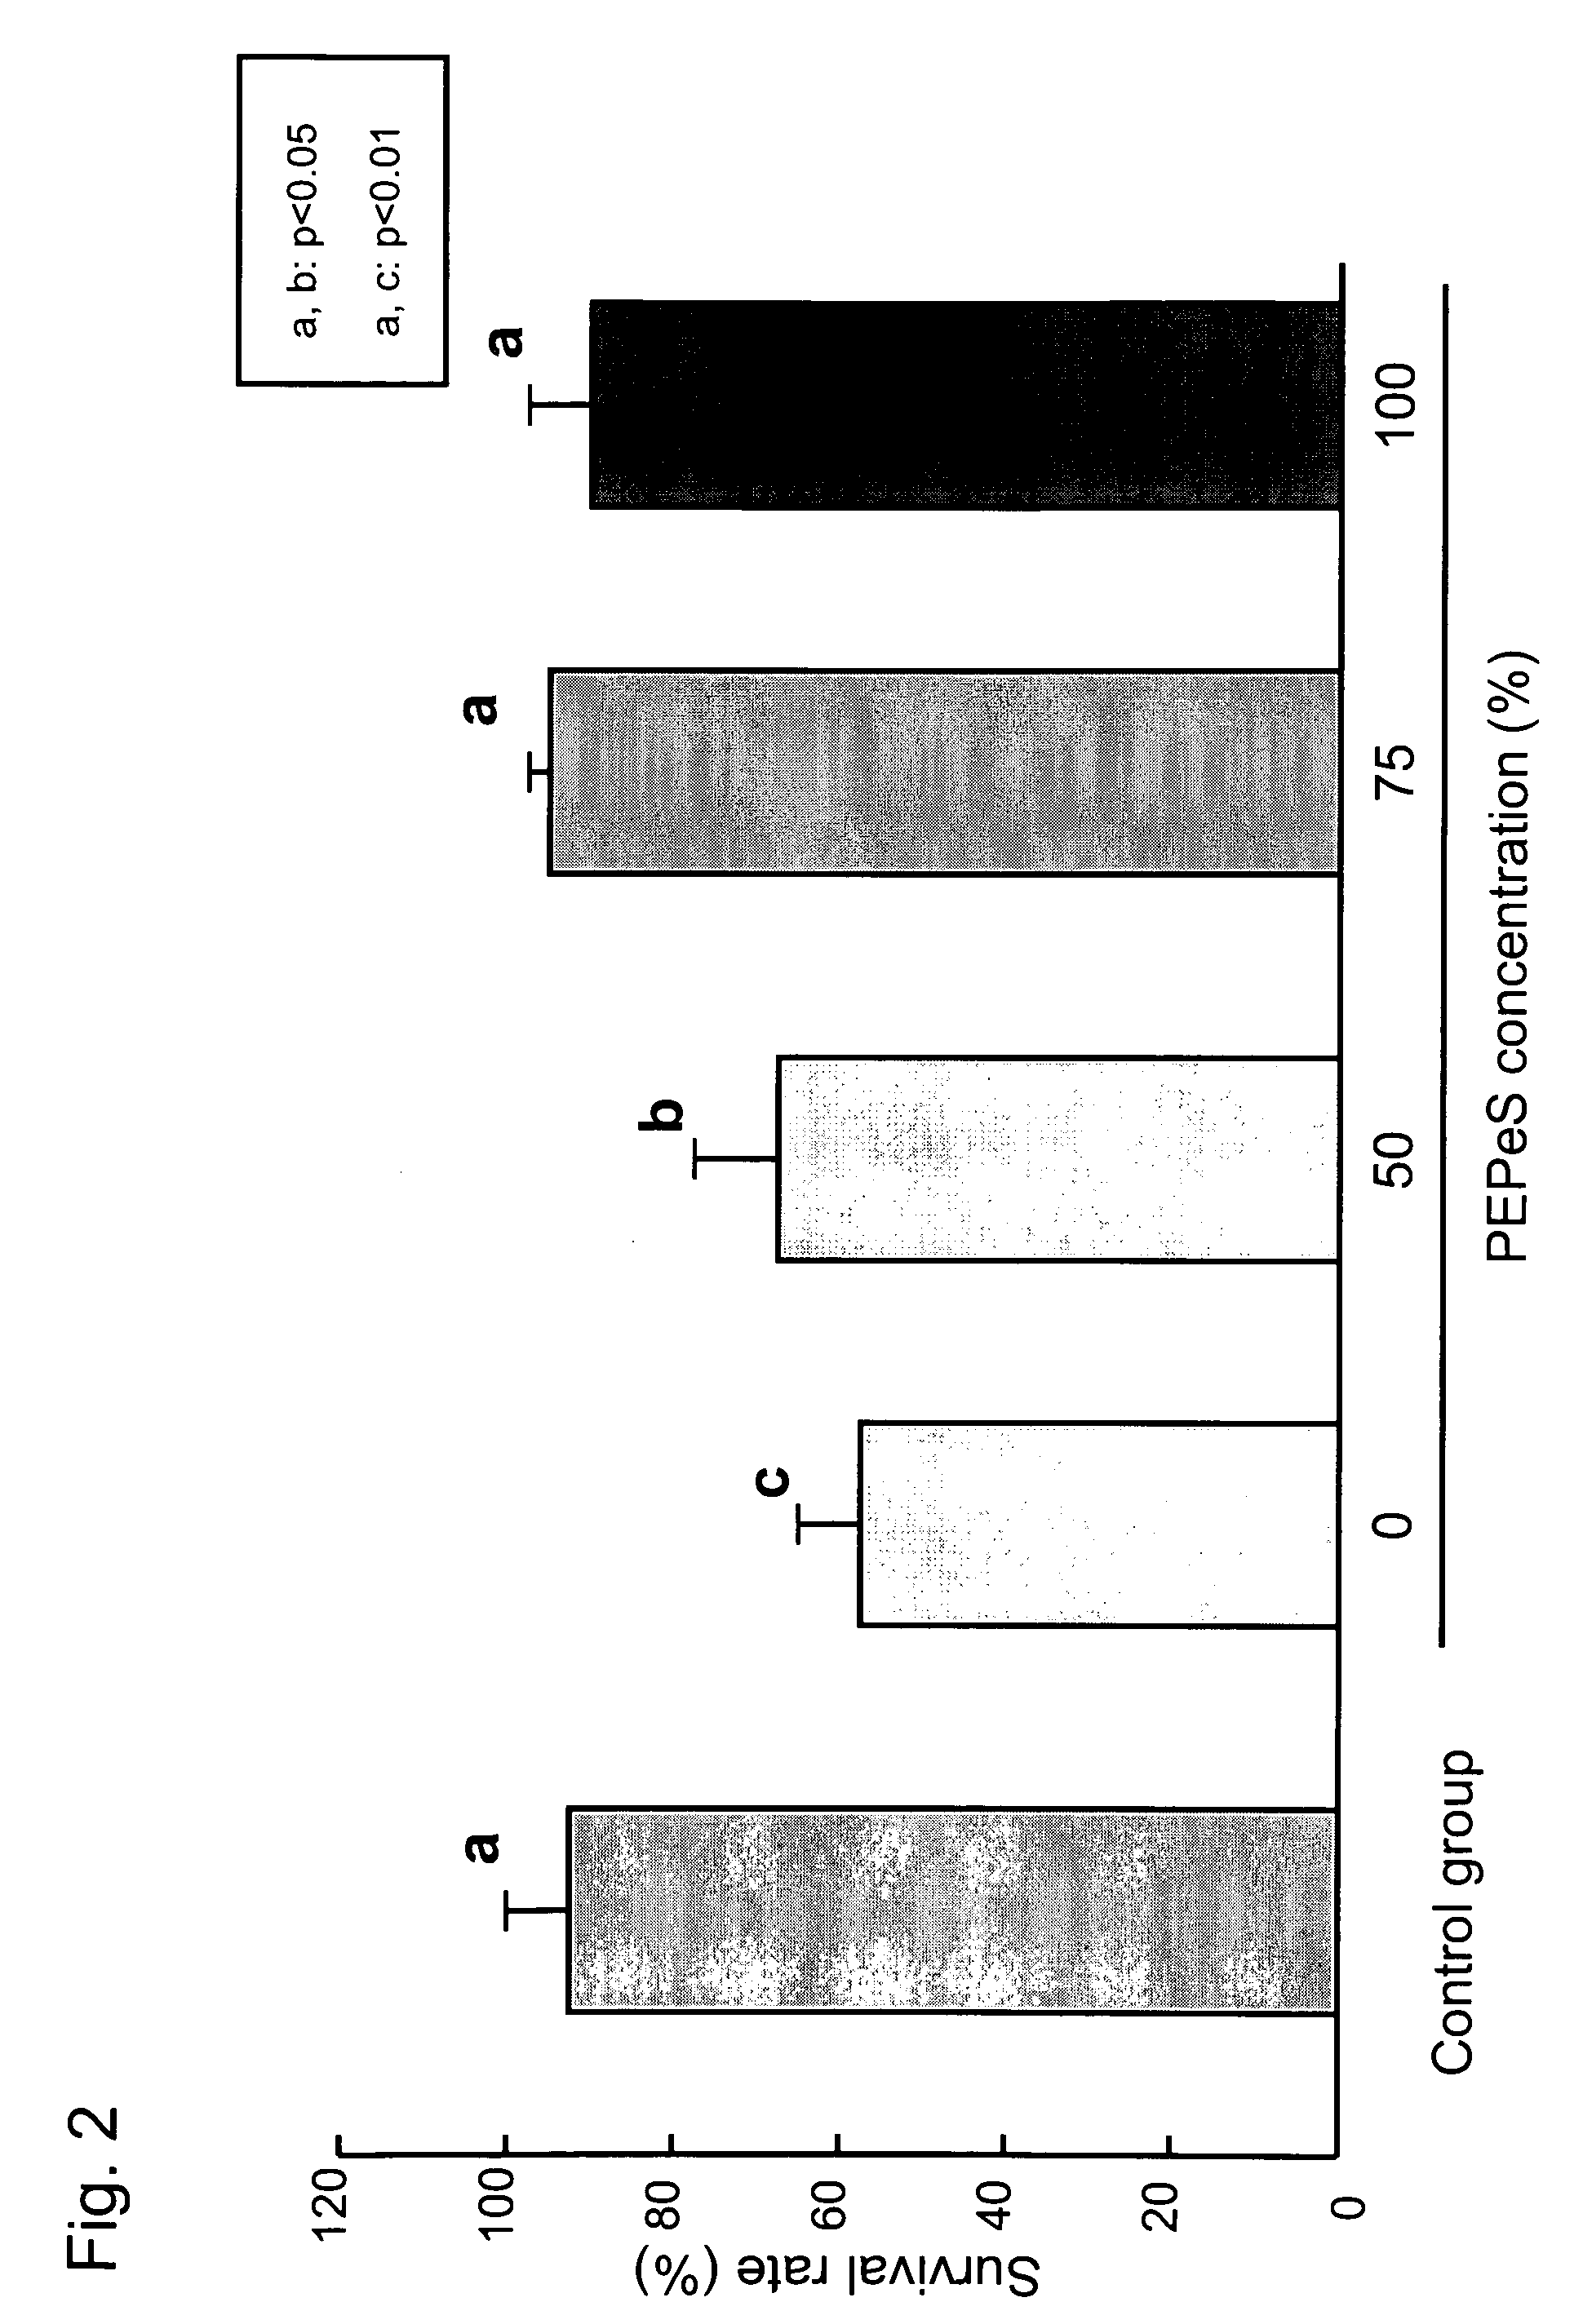 Method of Preserving Early Embryos of Experimental Animals by Vitrification